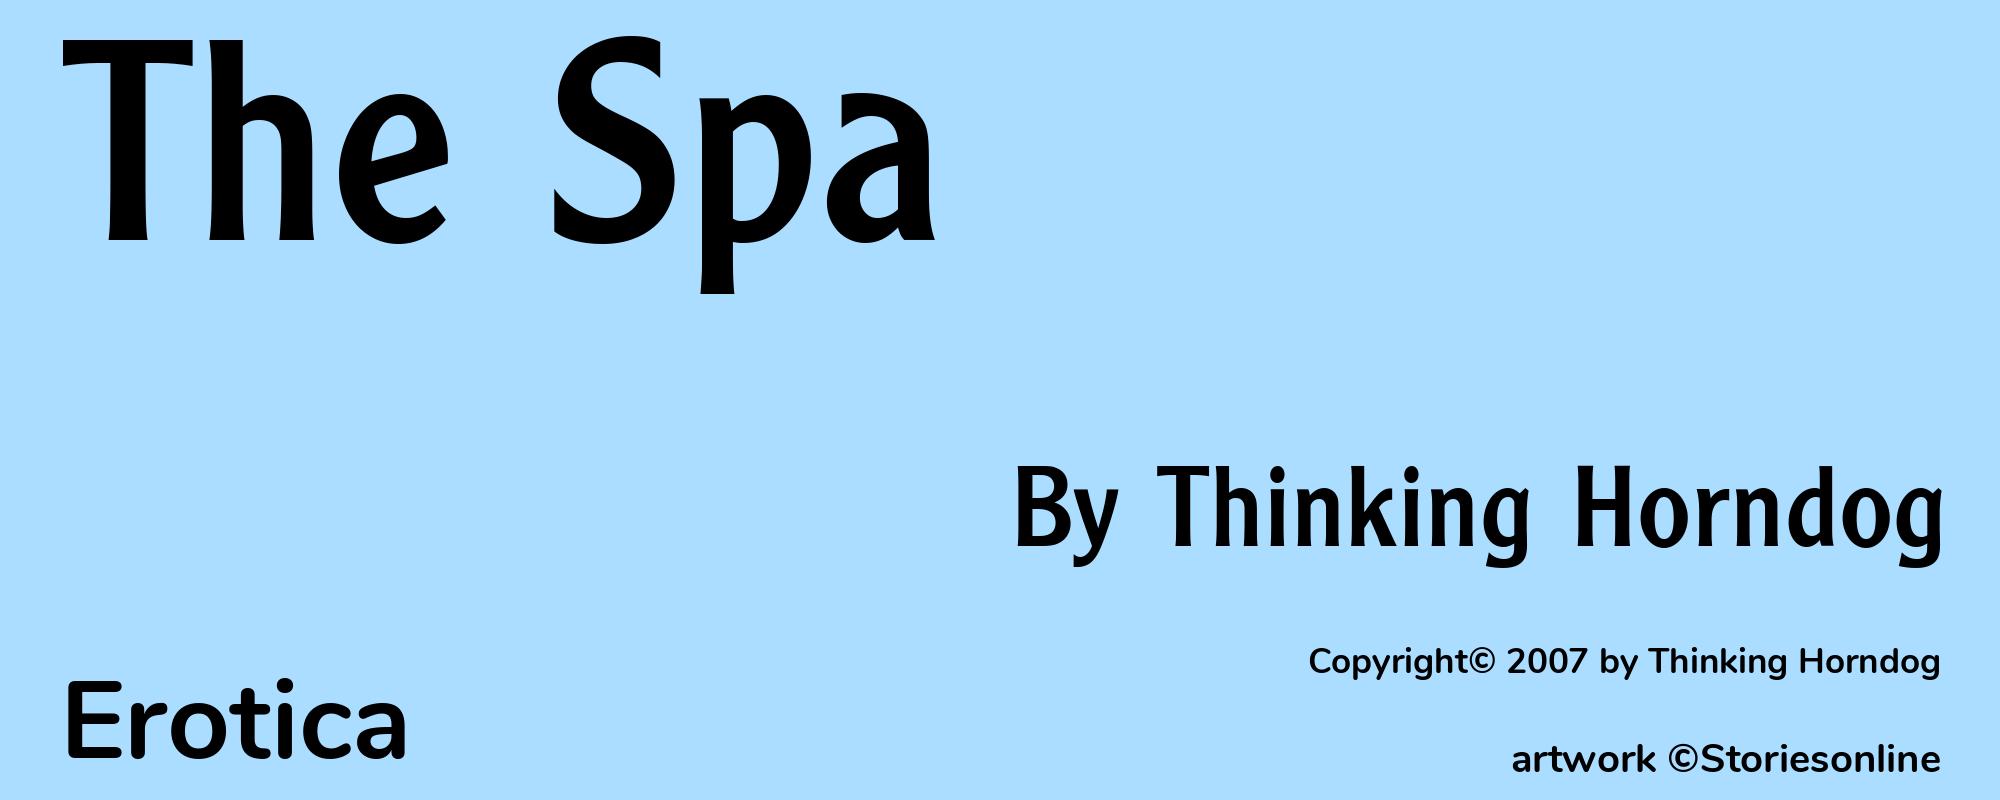 The Spa - Cover